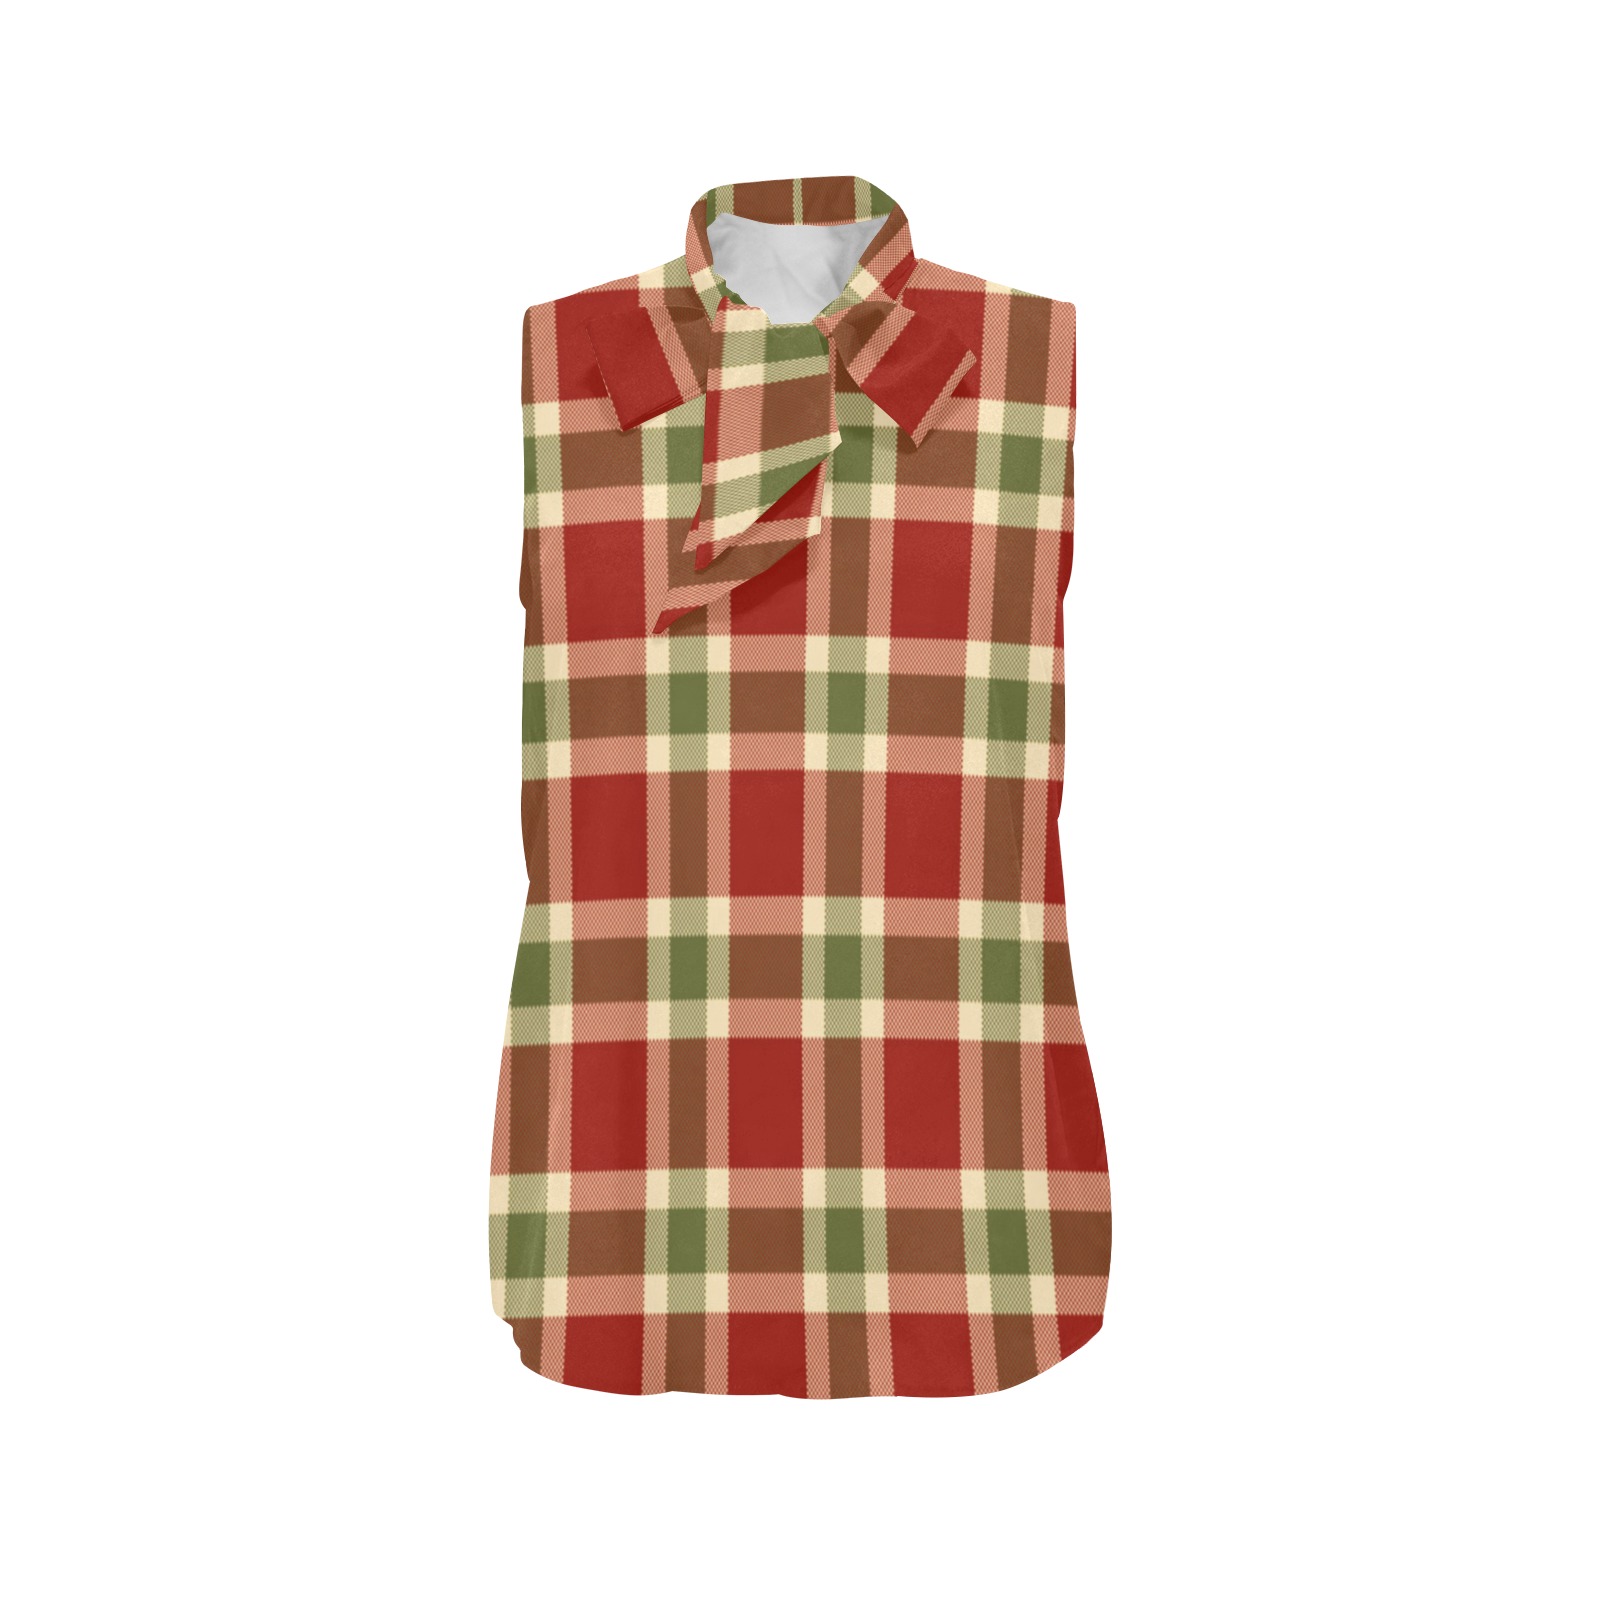 Red And Green Plaid Women's Bow Tie V-Neck Sleeveless Shirt (Model T69)